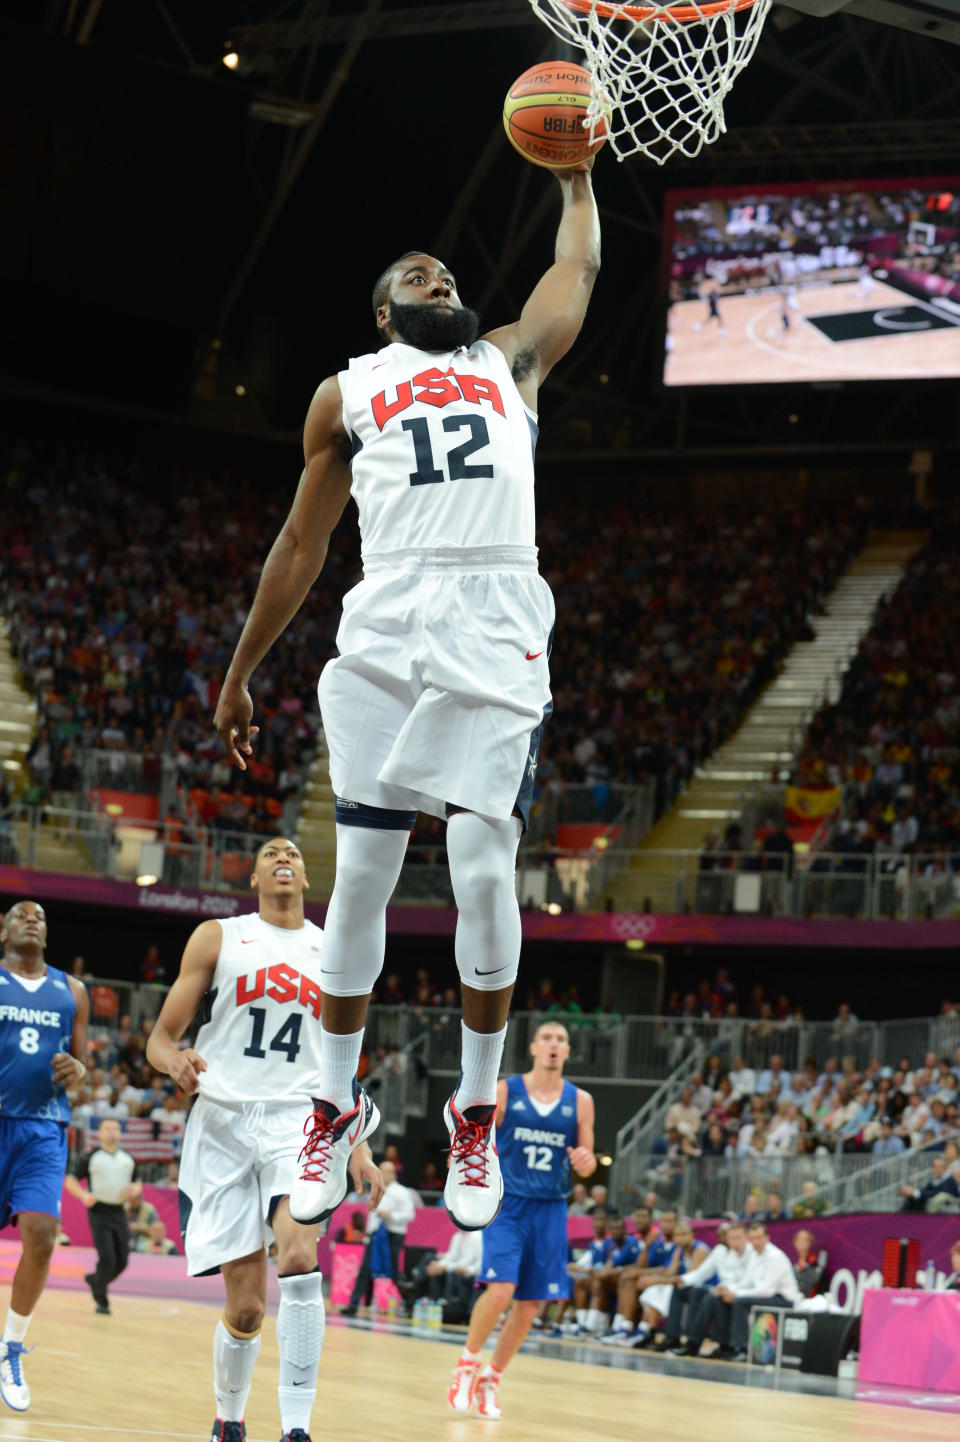 LONDON, ENGLAND - JULY 29:James Harden #12 of the United States dunks versus France at the Olympic Park Basketball Arena during the London Olympic Games on July 29, 2012 in London, England. NOTE TO USER: User expressly acknowledges and agrees that, by downloading and/or using this Photograph, user is consenting to the terms and conditions of the Getty Images License Agreement. Mandatory Copyright Notice: Copyright 2012 NBAE (Photo by Garrett W. Ellwood/NBAE via Getty Images)